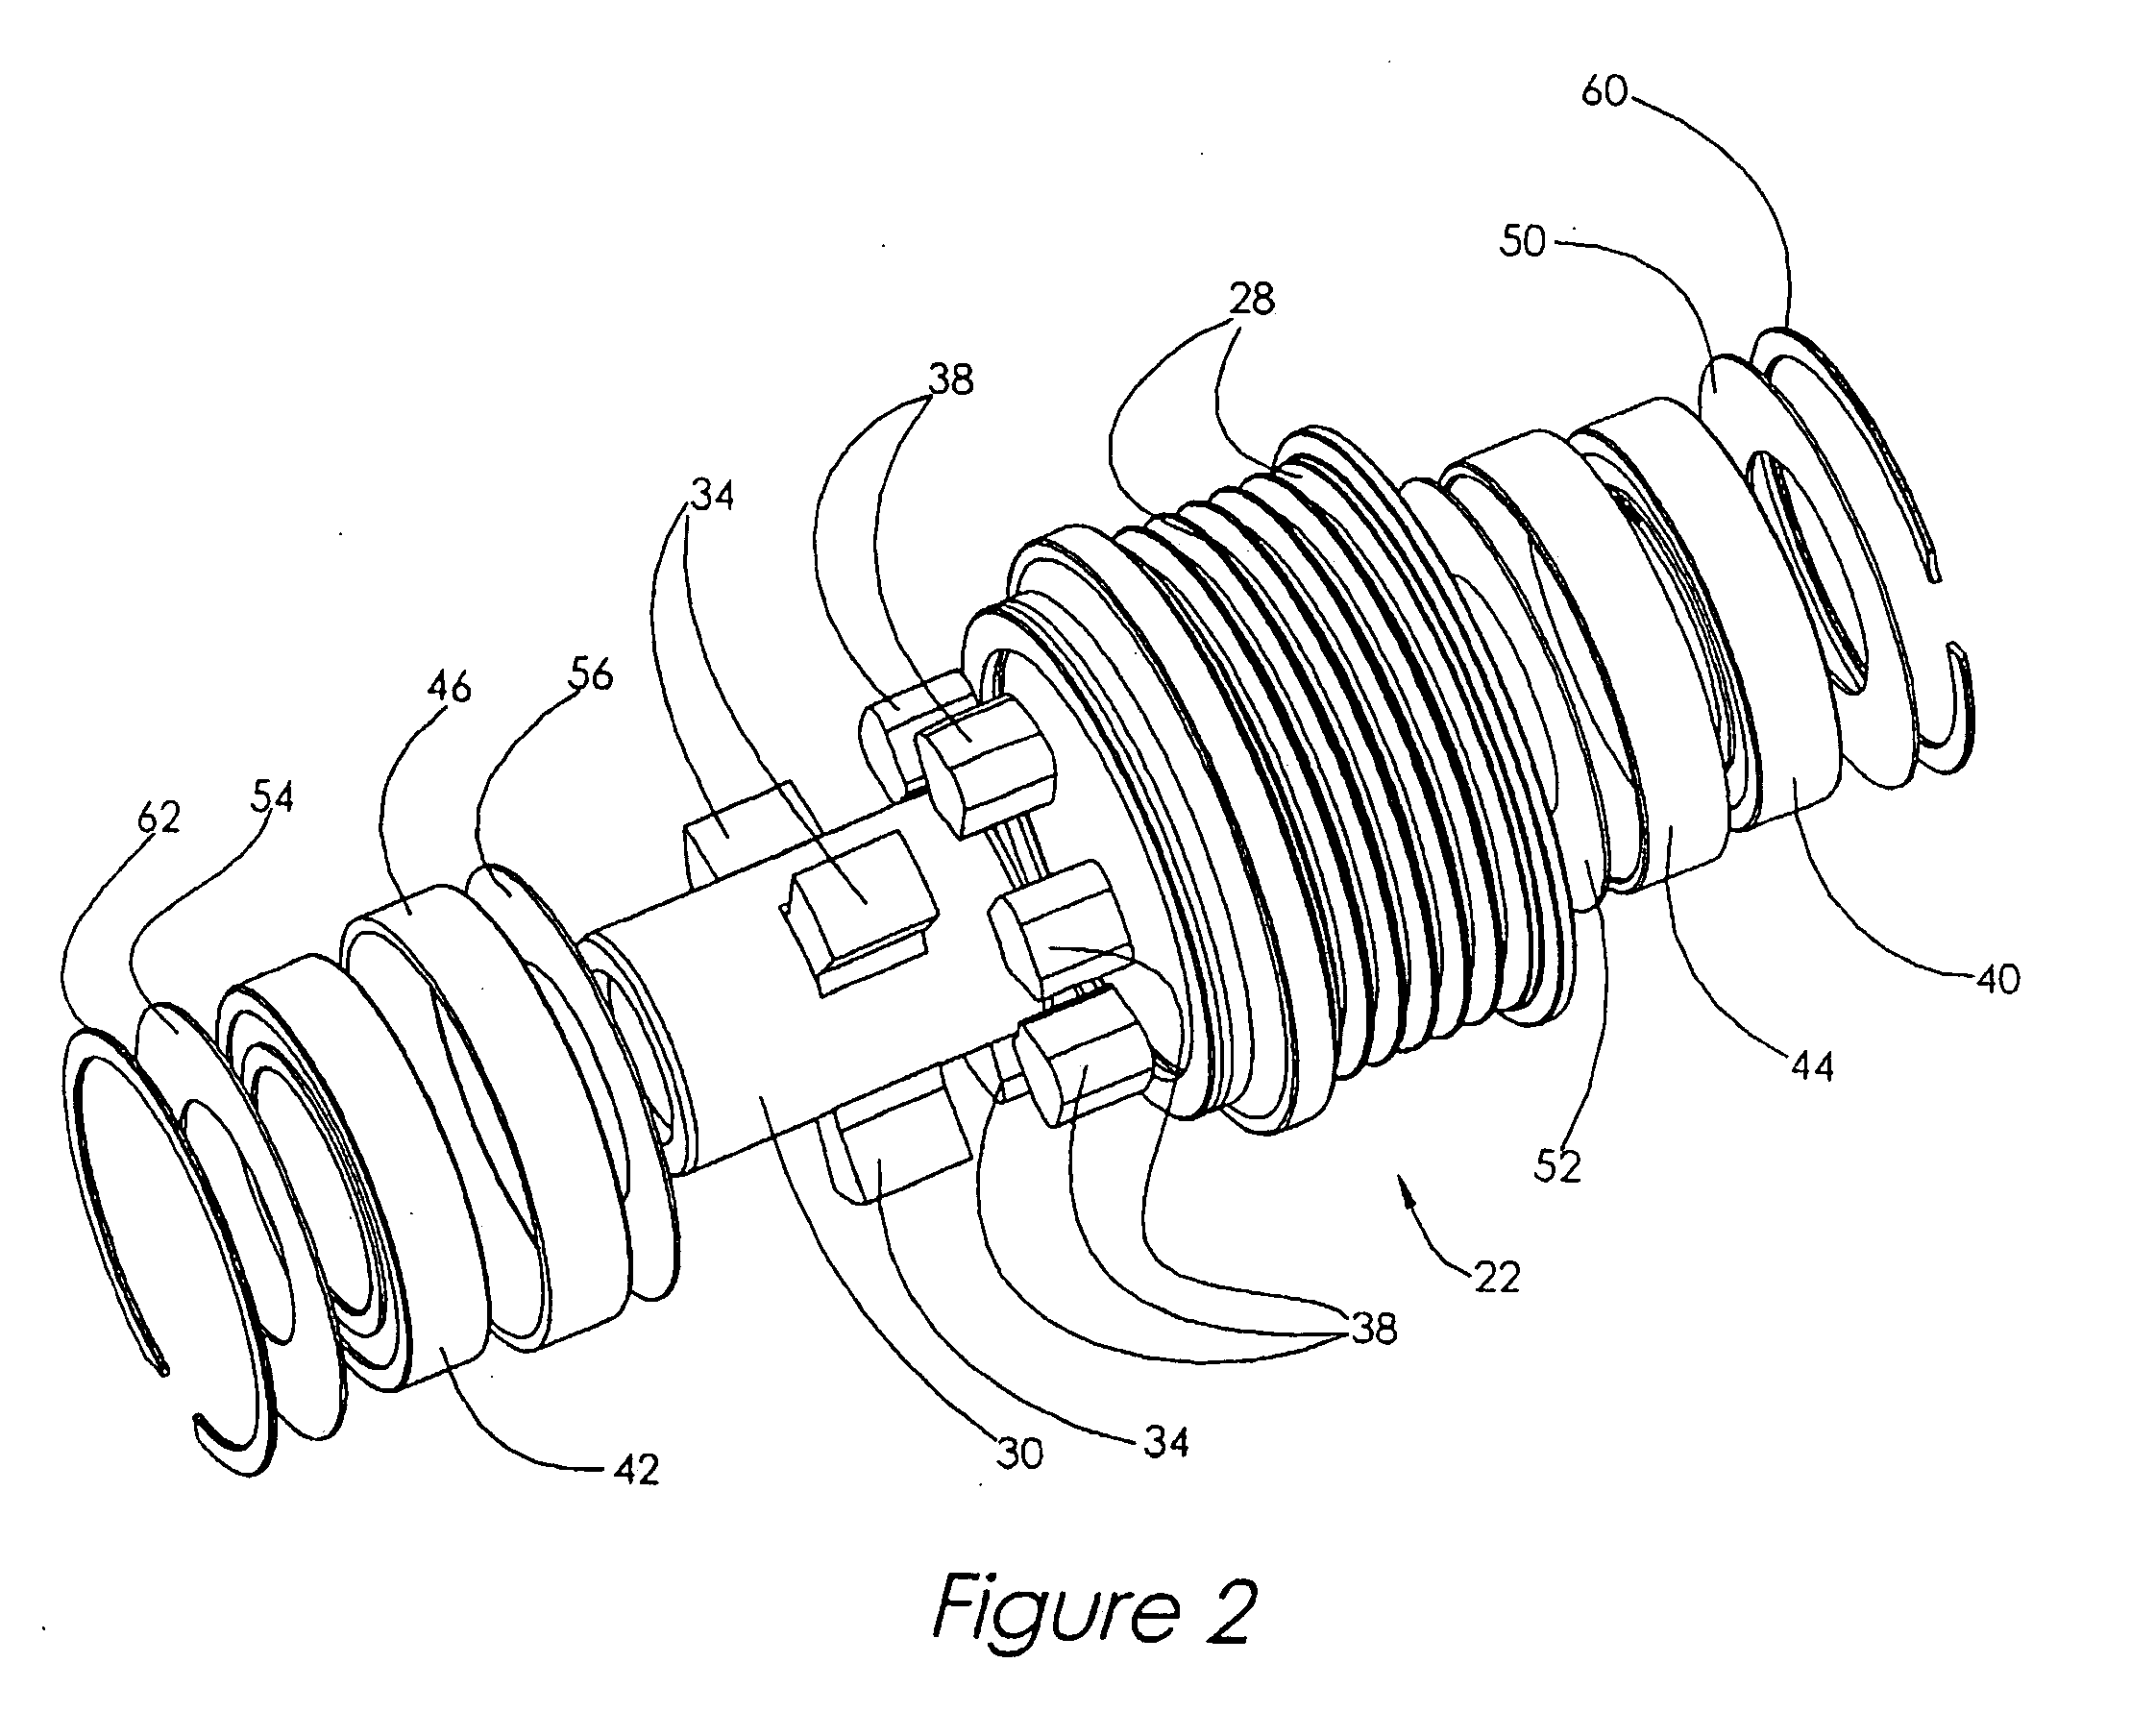 Polymer spring controlled pulley assembly for rotary devices